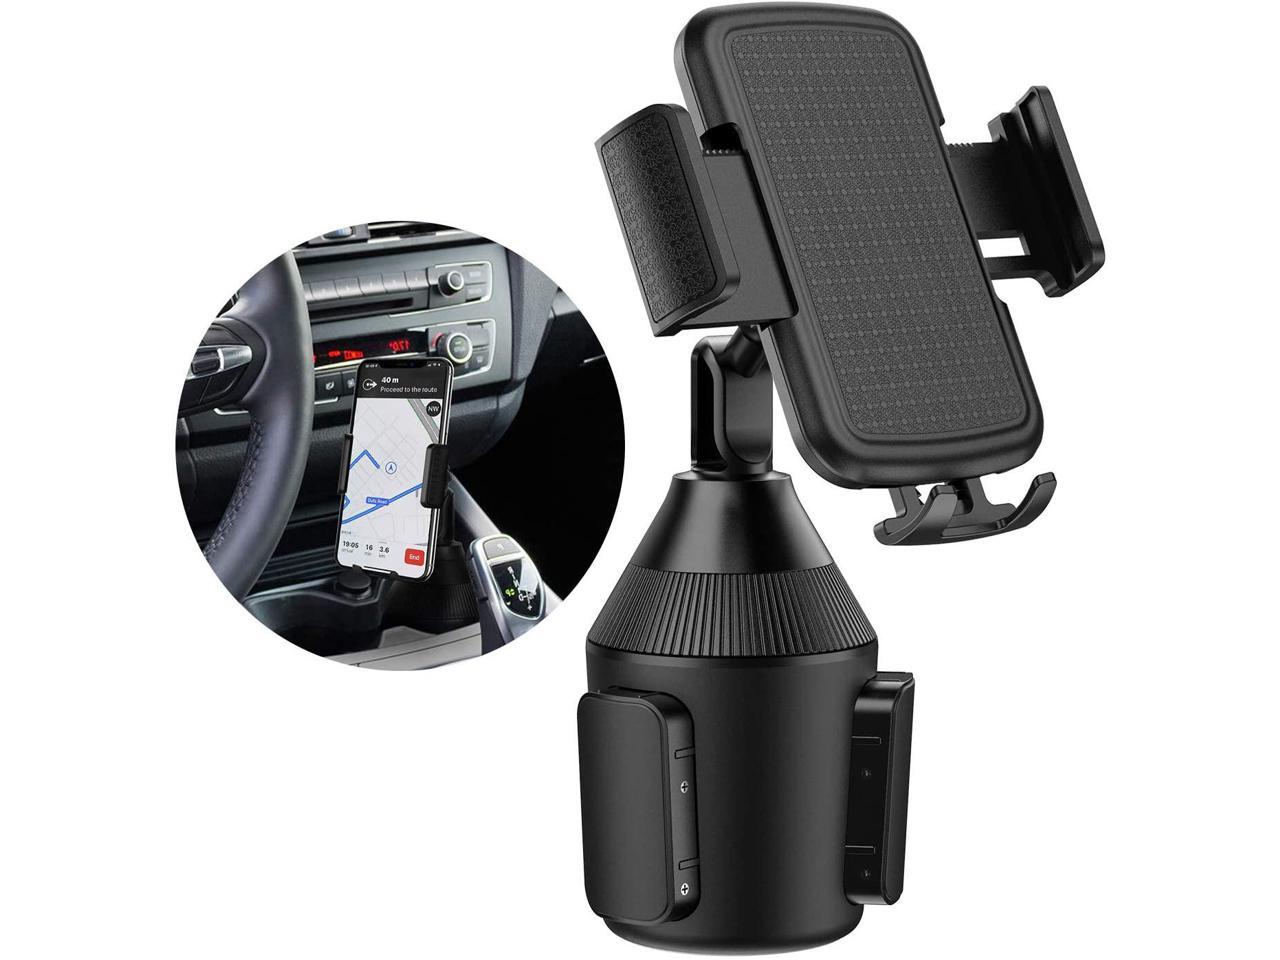 Cup Holder Phone Mount for Car Adjustable Cradle Car Mount for iPhone 11 Pro/XR/XS Max/X/8/7 Plus/6s/Samsung S10+/Note 9/S8 Plus 